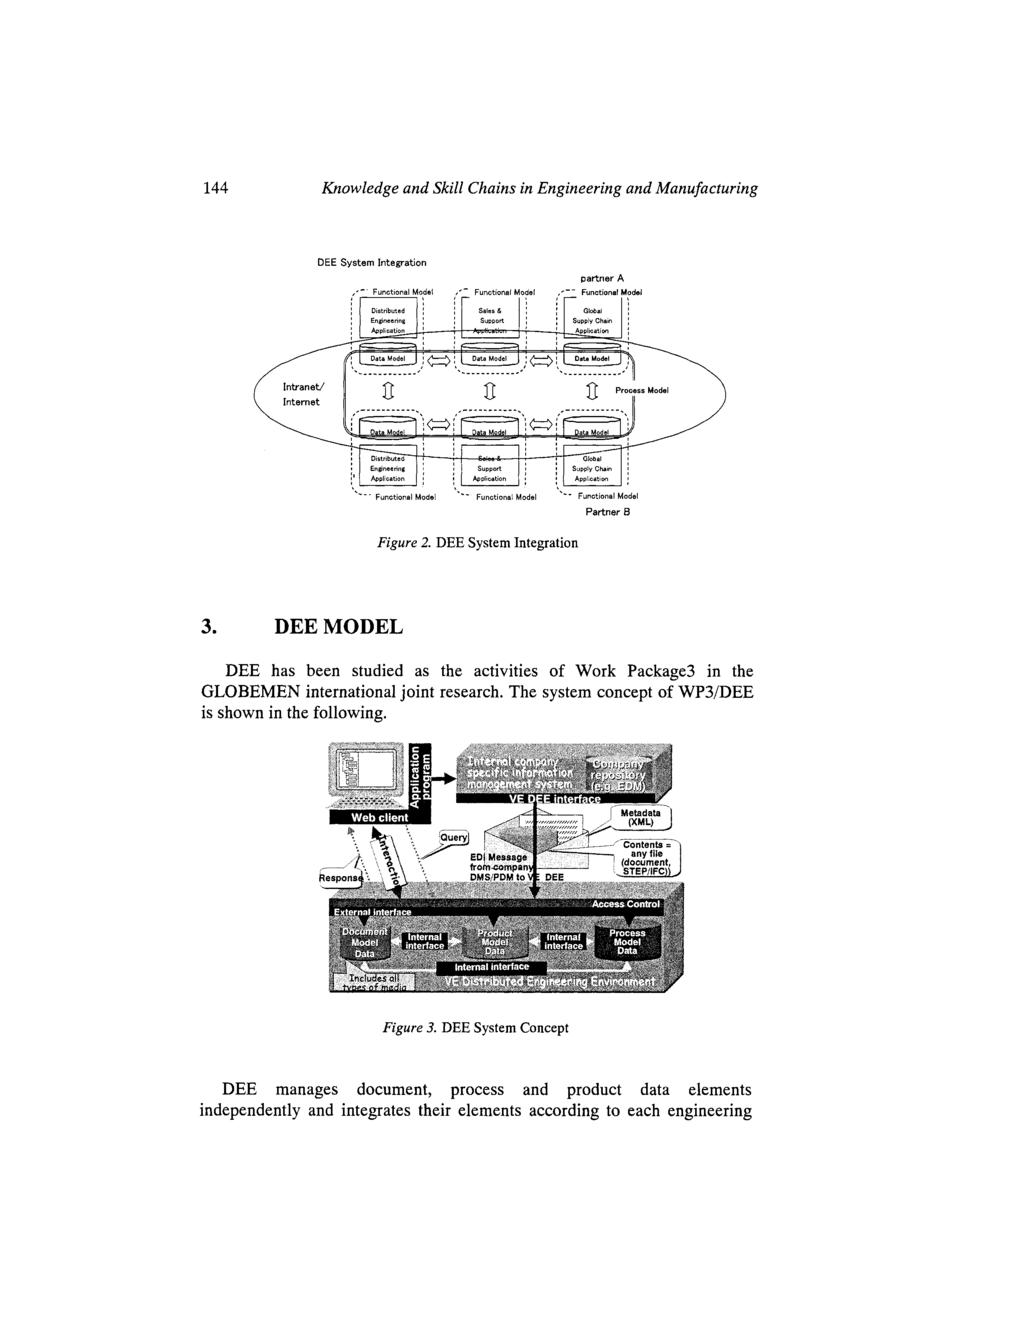 Knowledge and Skill Chains in Engineering and Manufacturing DEE System Integration ---. Functional Model '" Funotional Model '-* Funotionsl Model Figure 2. DEE System Integration Partner B 3.